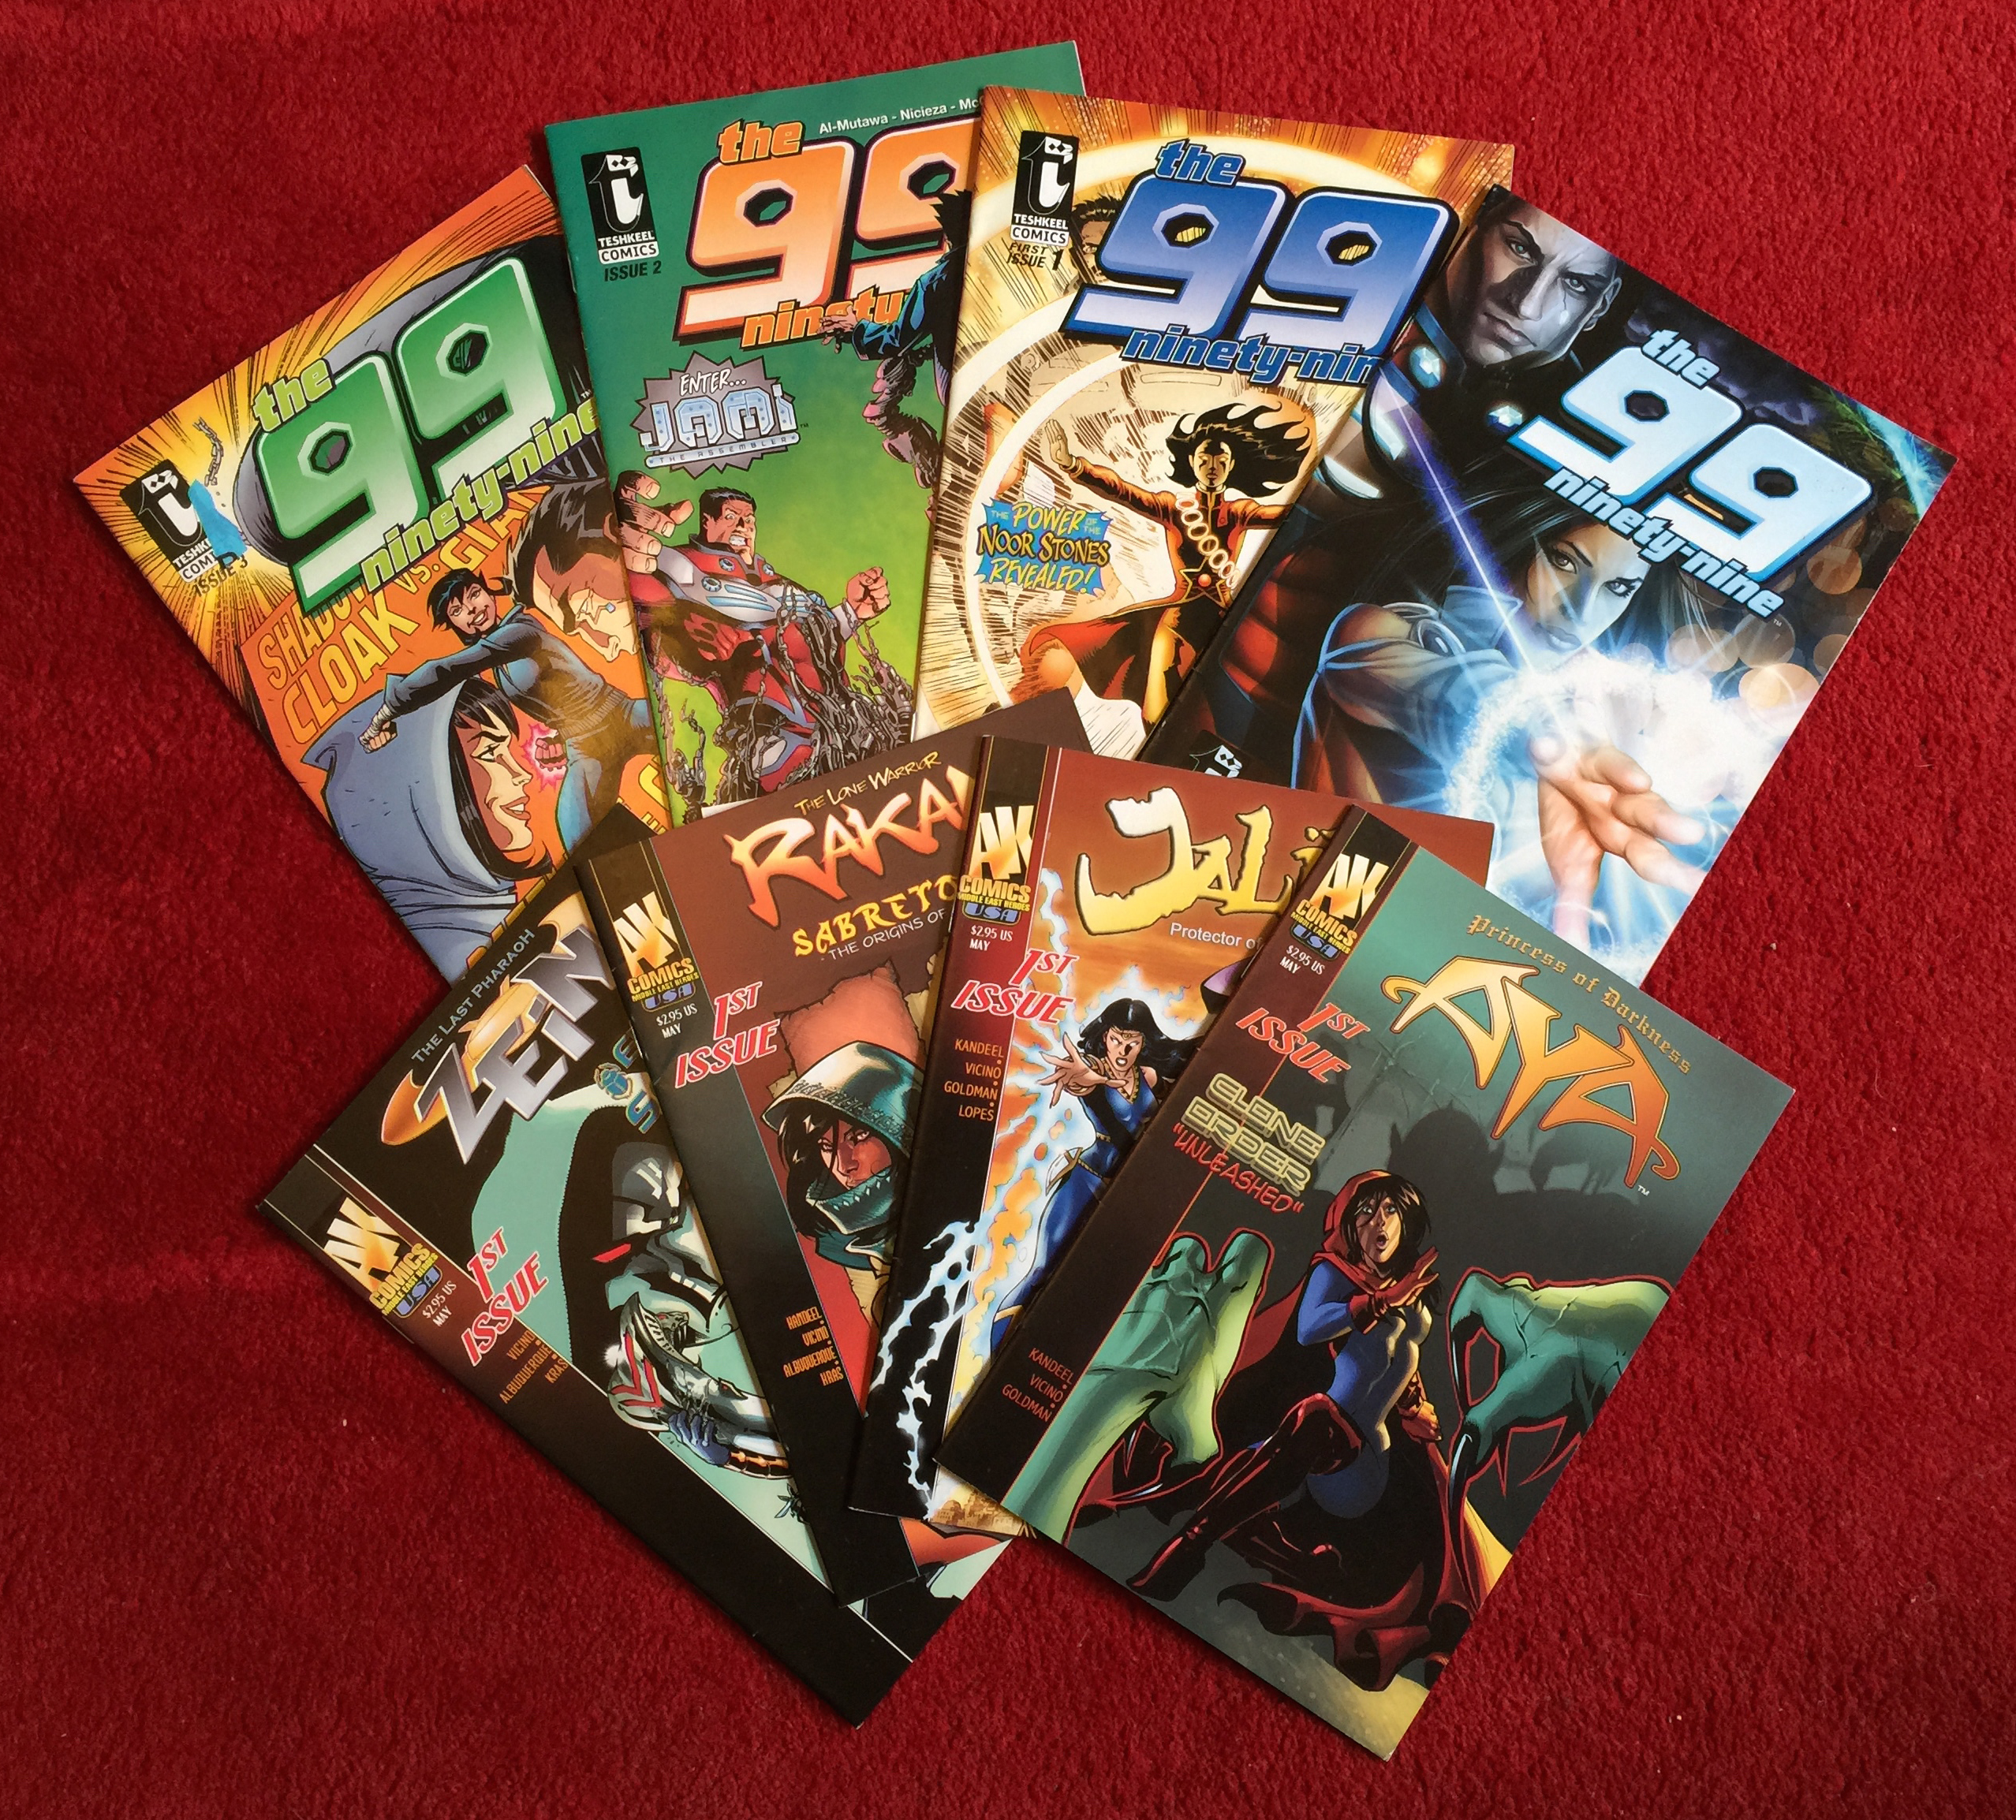 A selection of comic books published by AK Comics and Teshkeel.